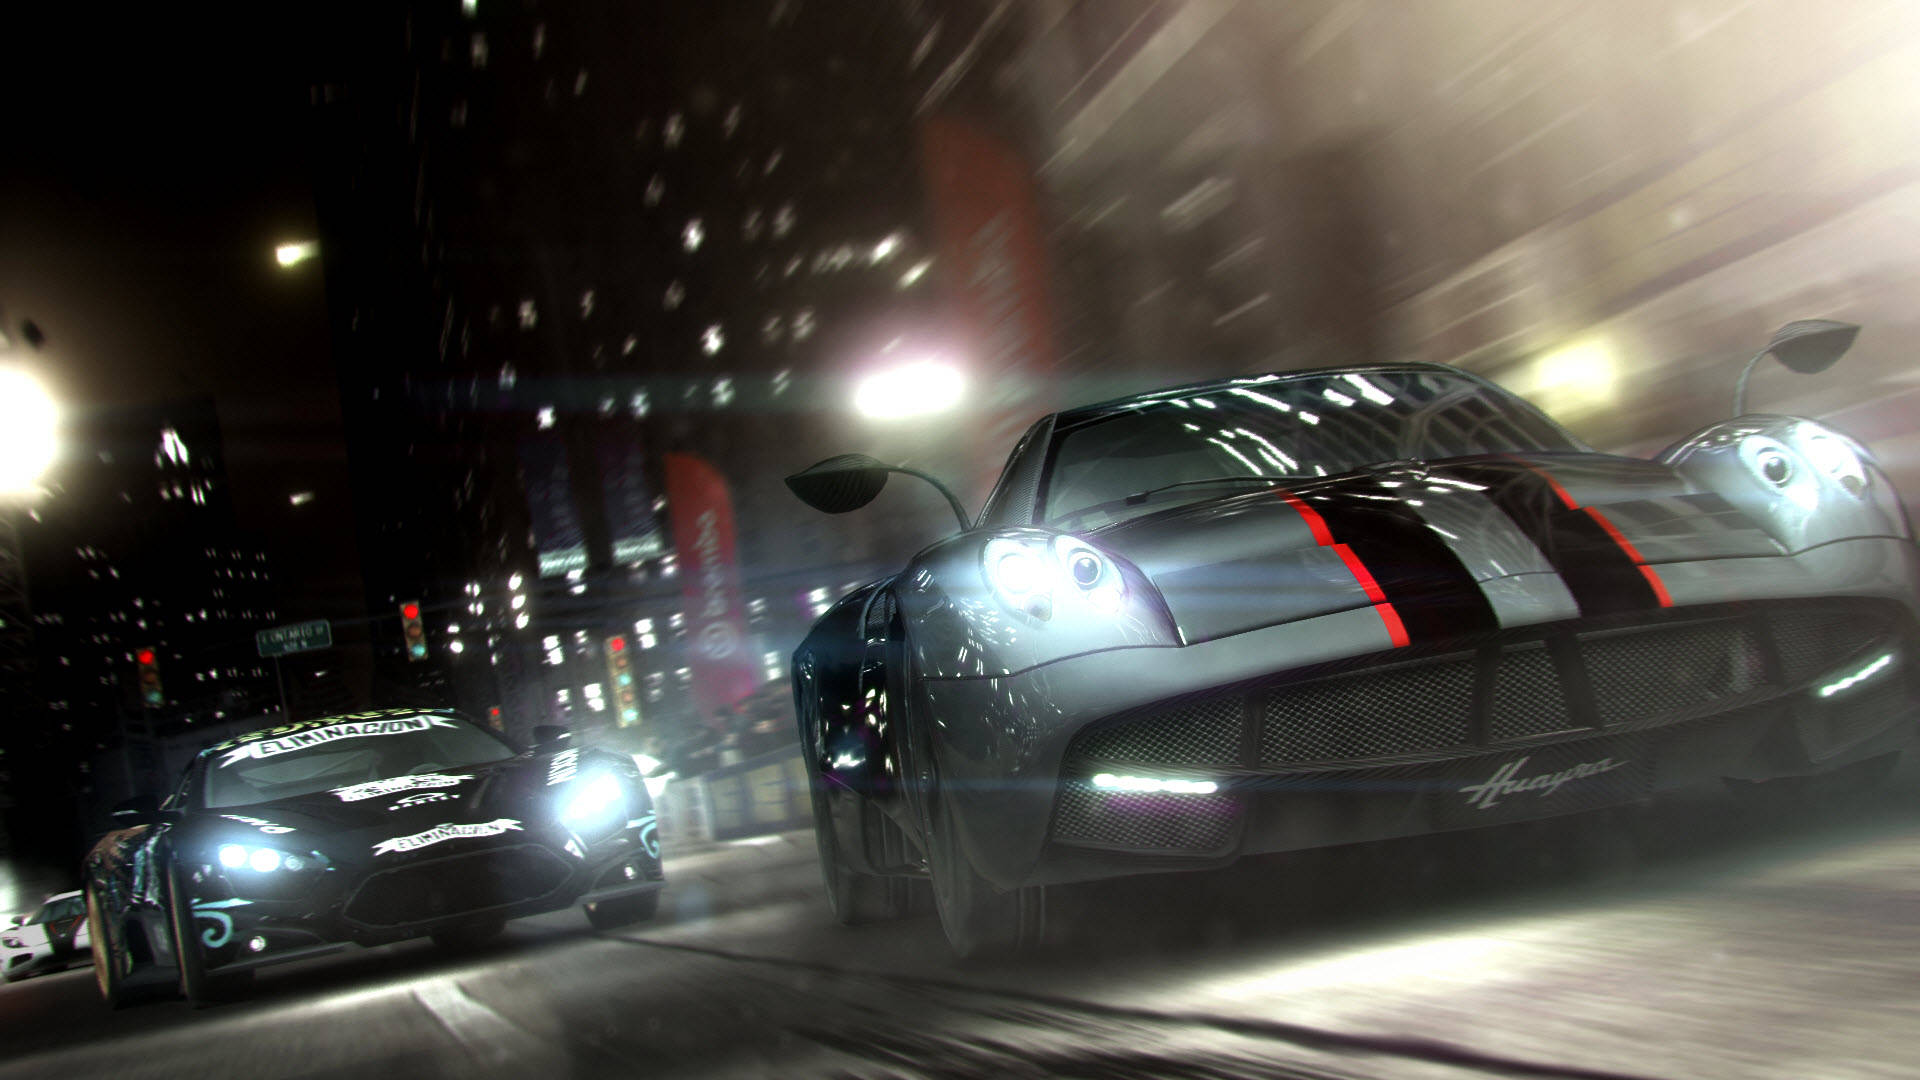 Fast-paced Racing In The City: Grid 2 Background